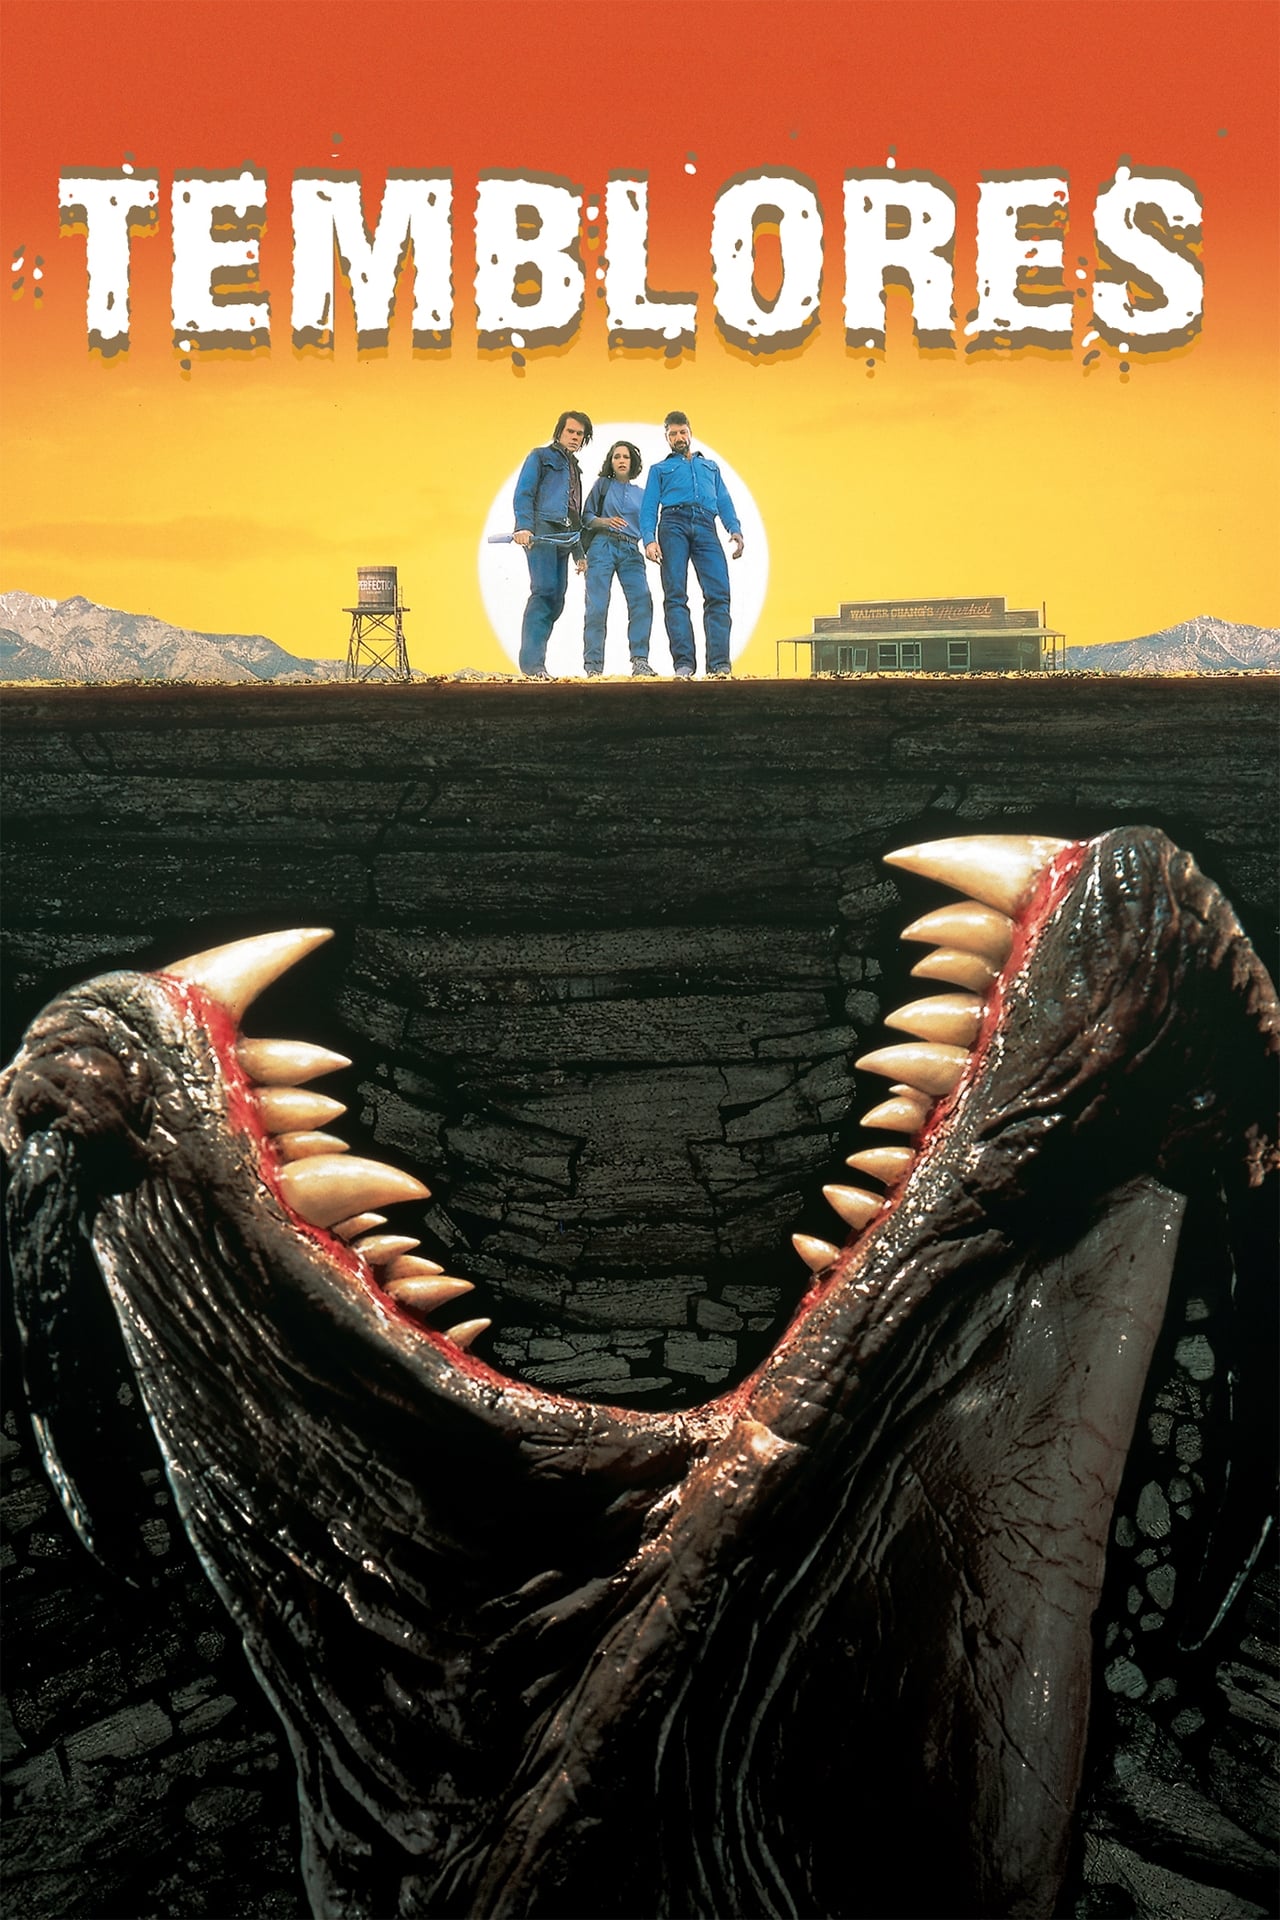 Tremors wiki, synopsis, reviews, watch and download
